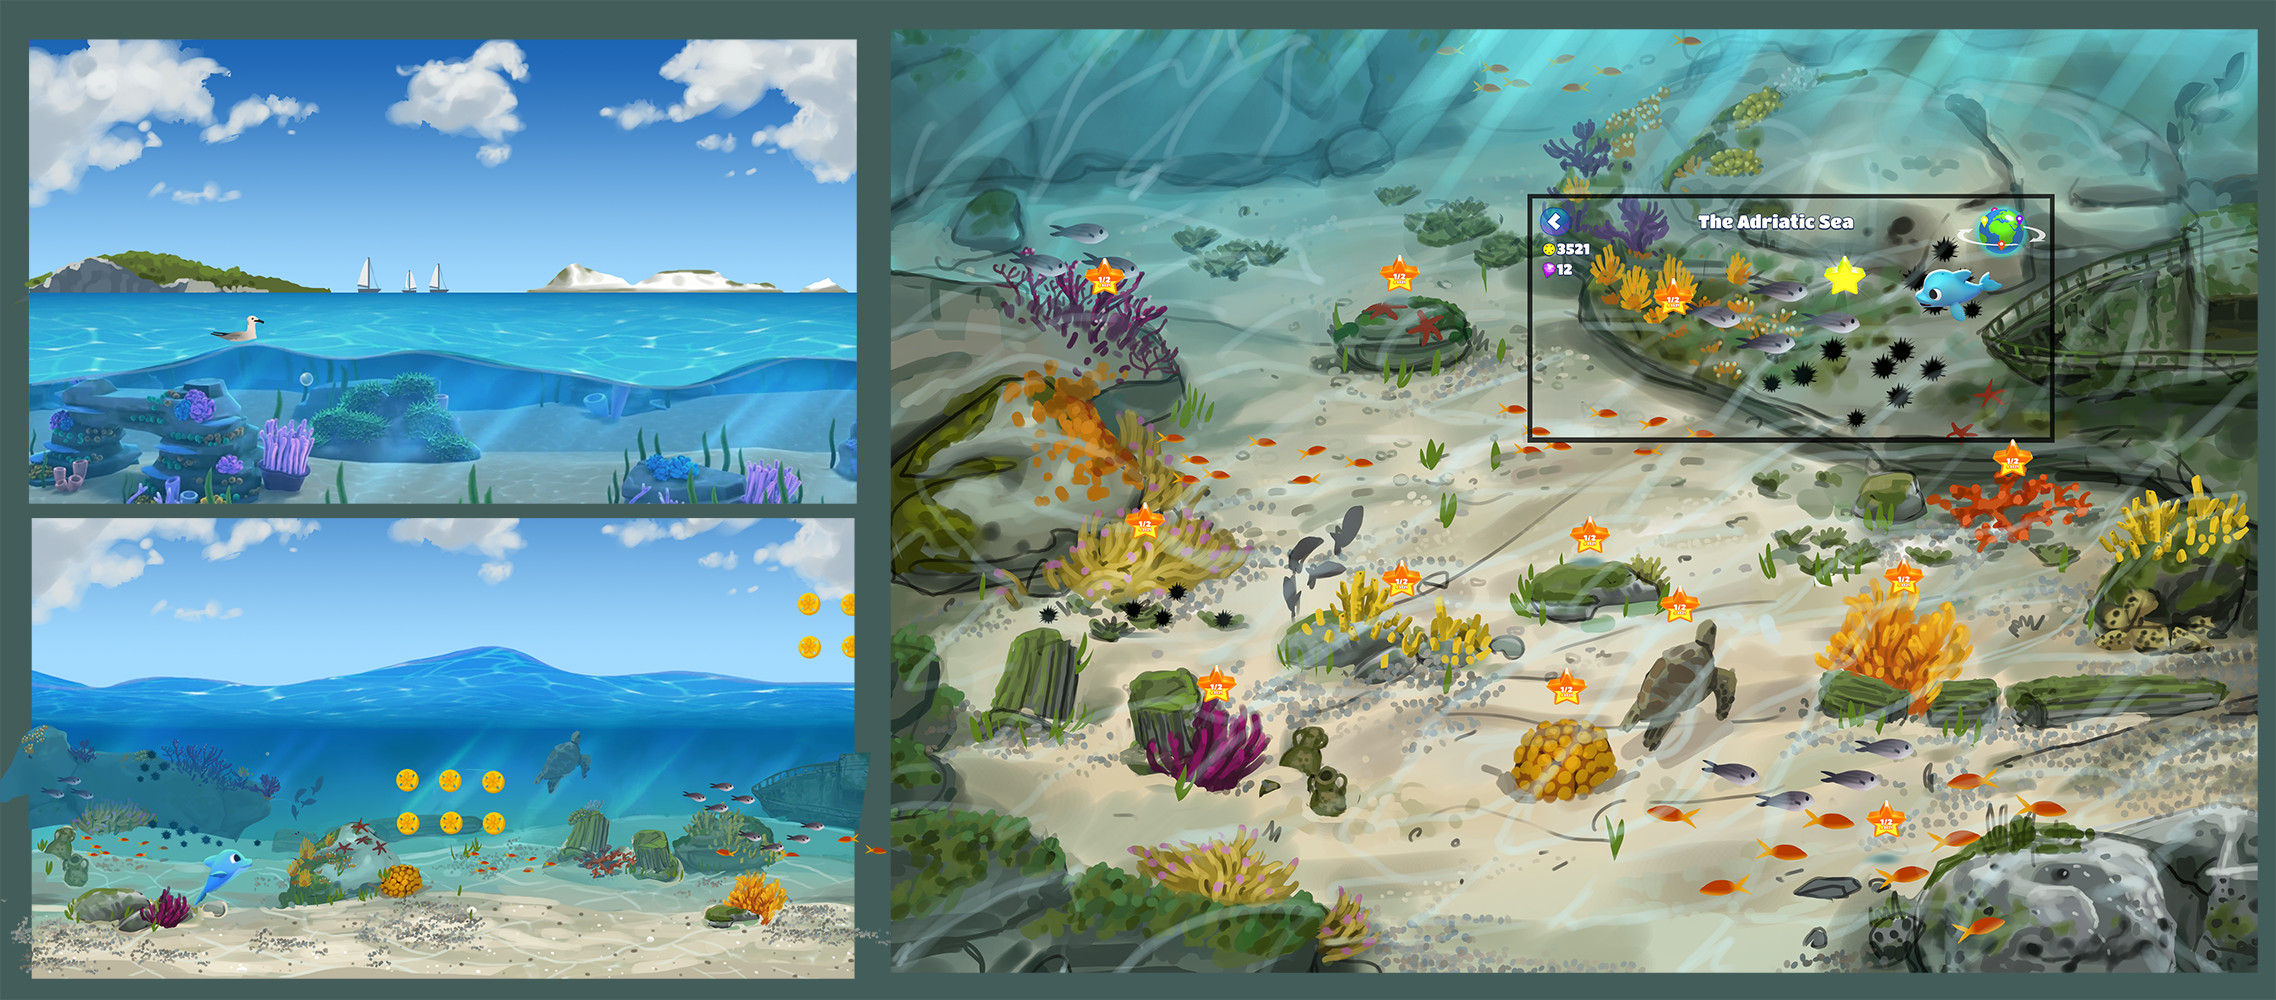 Concepts for gameplay and meta-game environments for the Adriatic biome

Each world of the game is set in a different part of the world affected by pollution that the player must fight off to bring diversity back to the environment.